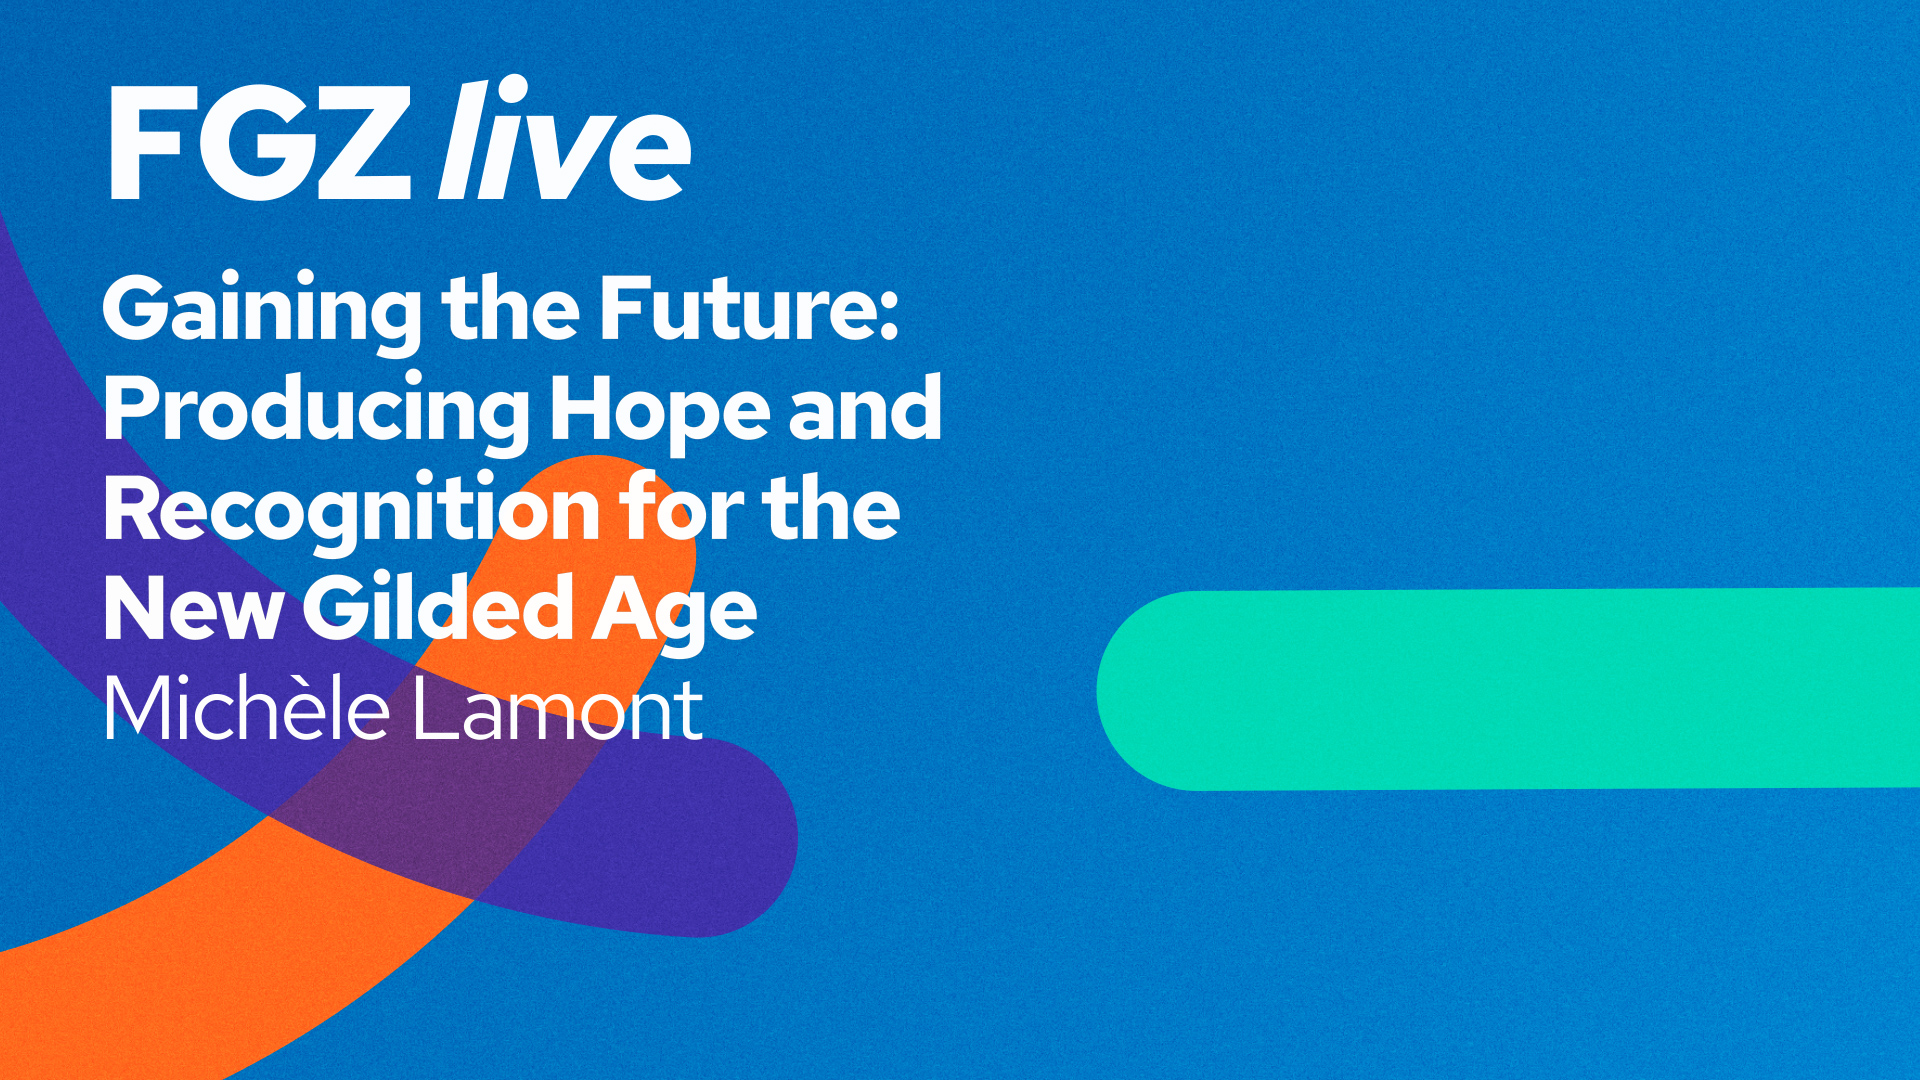 Michèle Lamont: Gaining the Future. Producing Hope and Recognition for the New Gilded Age – FGZ live - Image